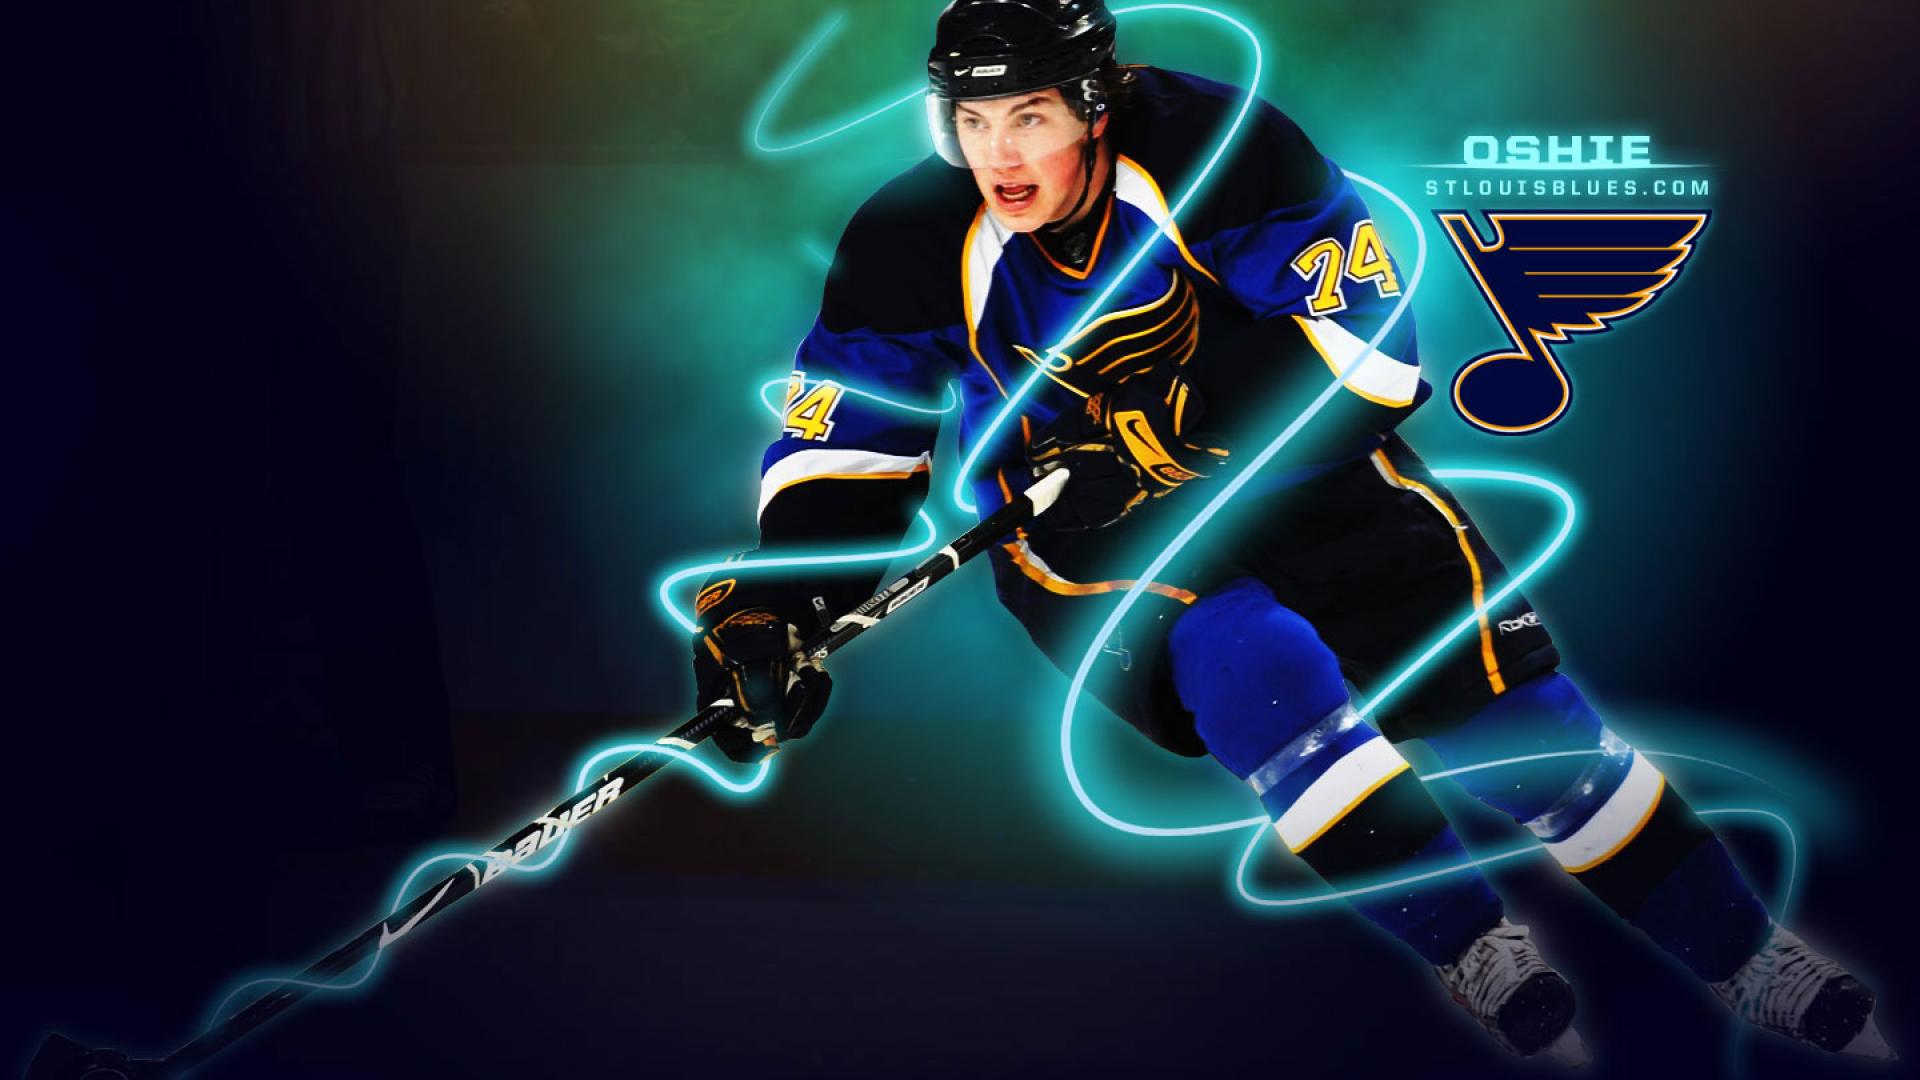 Nhl St Louis Blues Oshie Wallpaper In Hockey